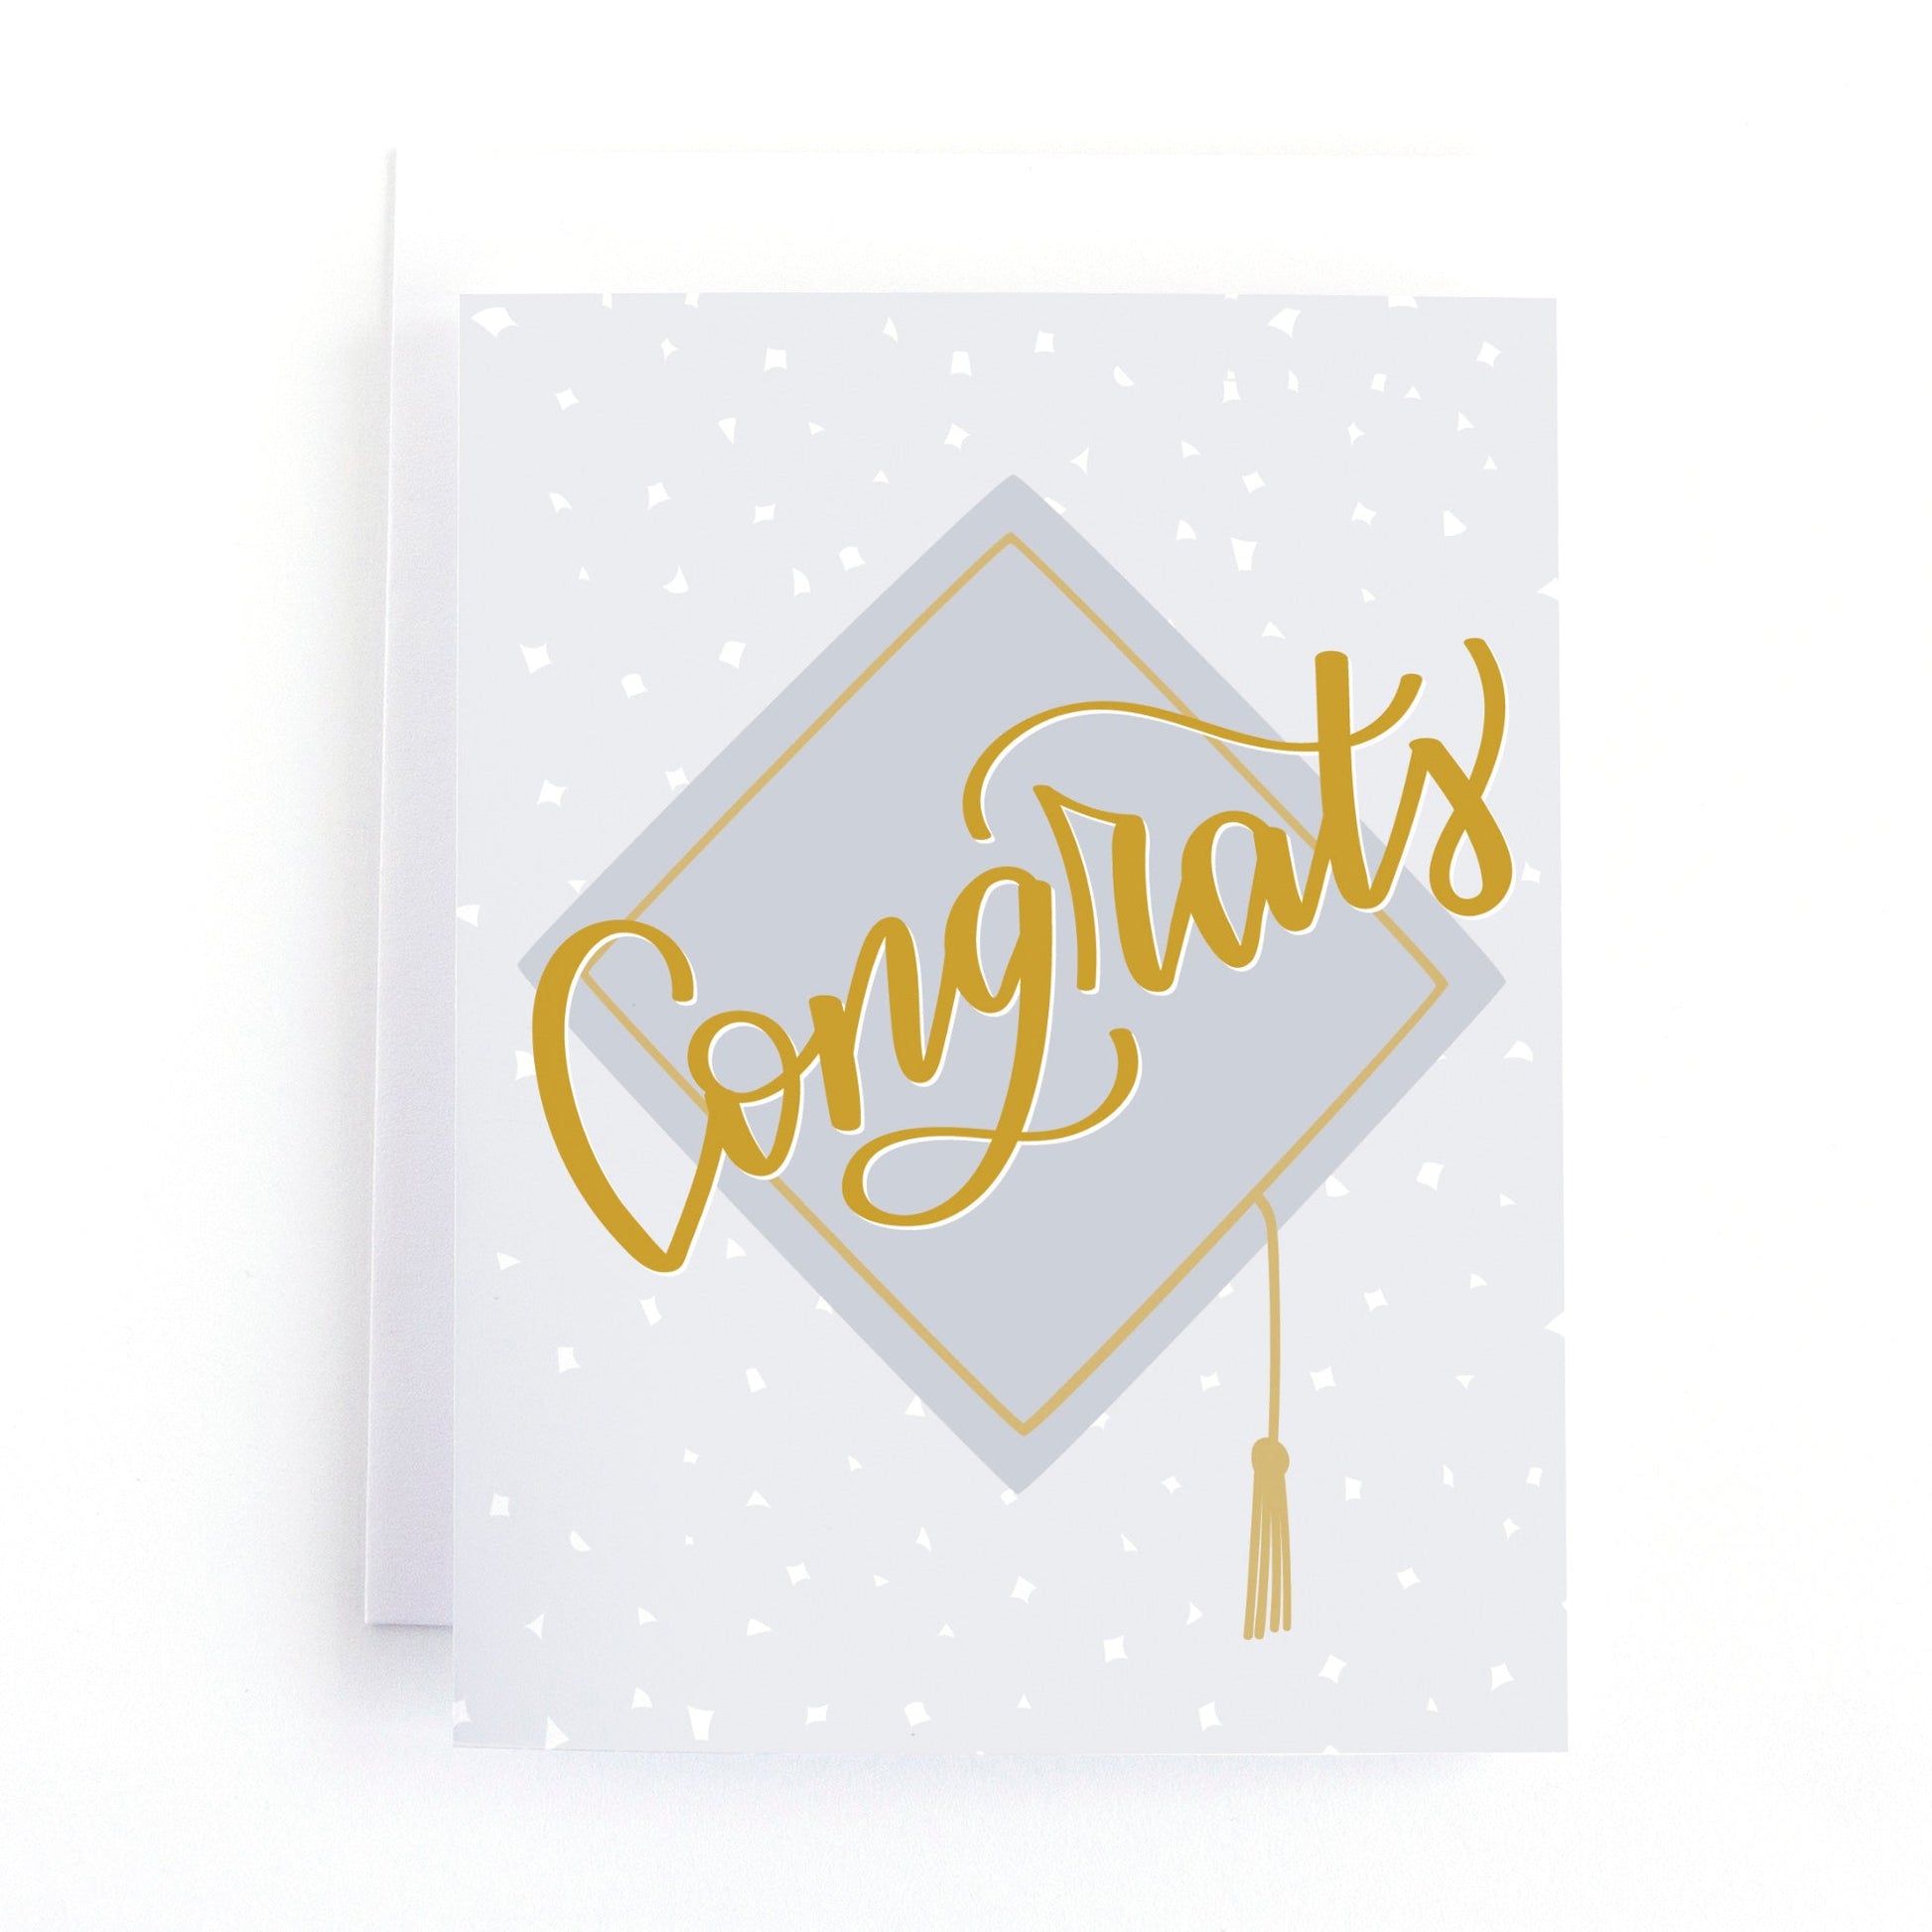 Graduation Card that says "congrats" in hand lettering script over an illustration of a graduation cap in grey and gold